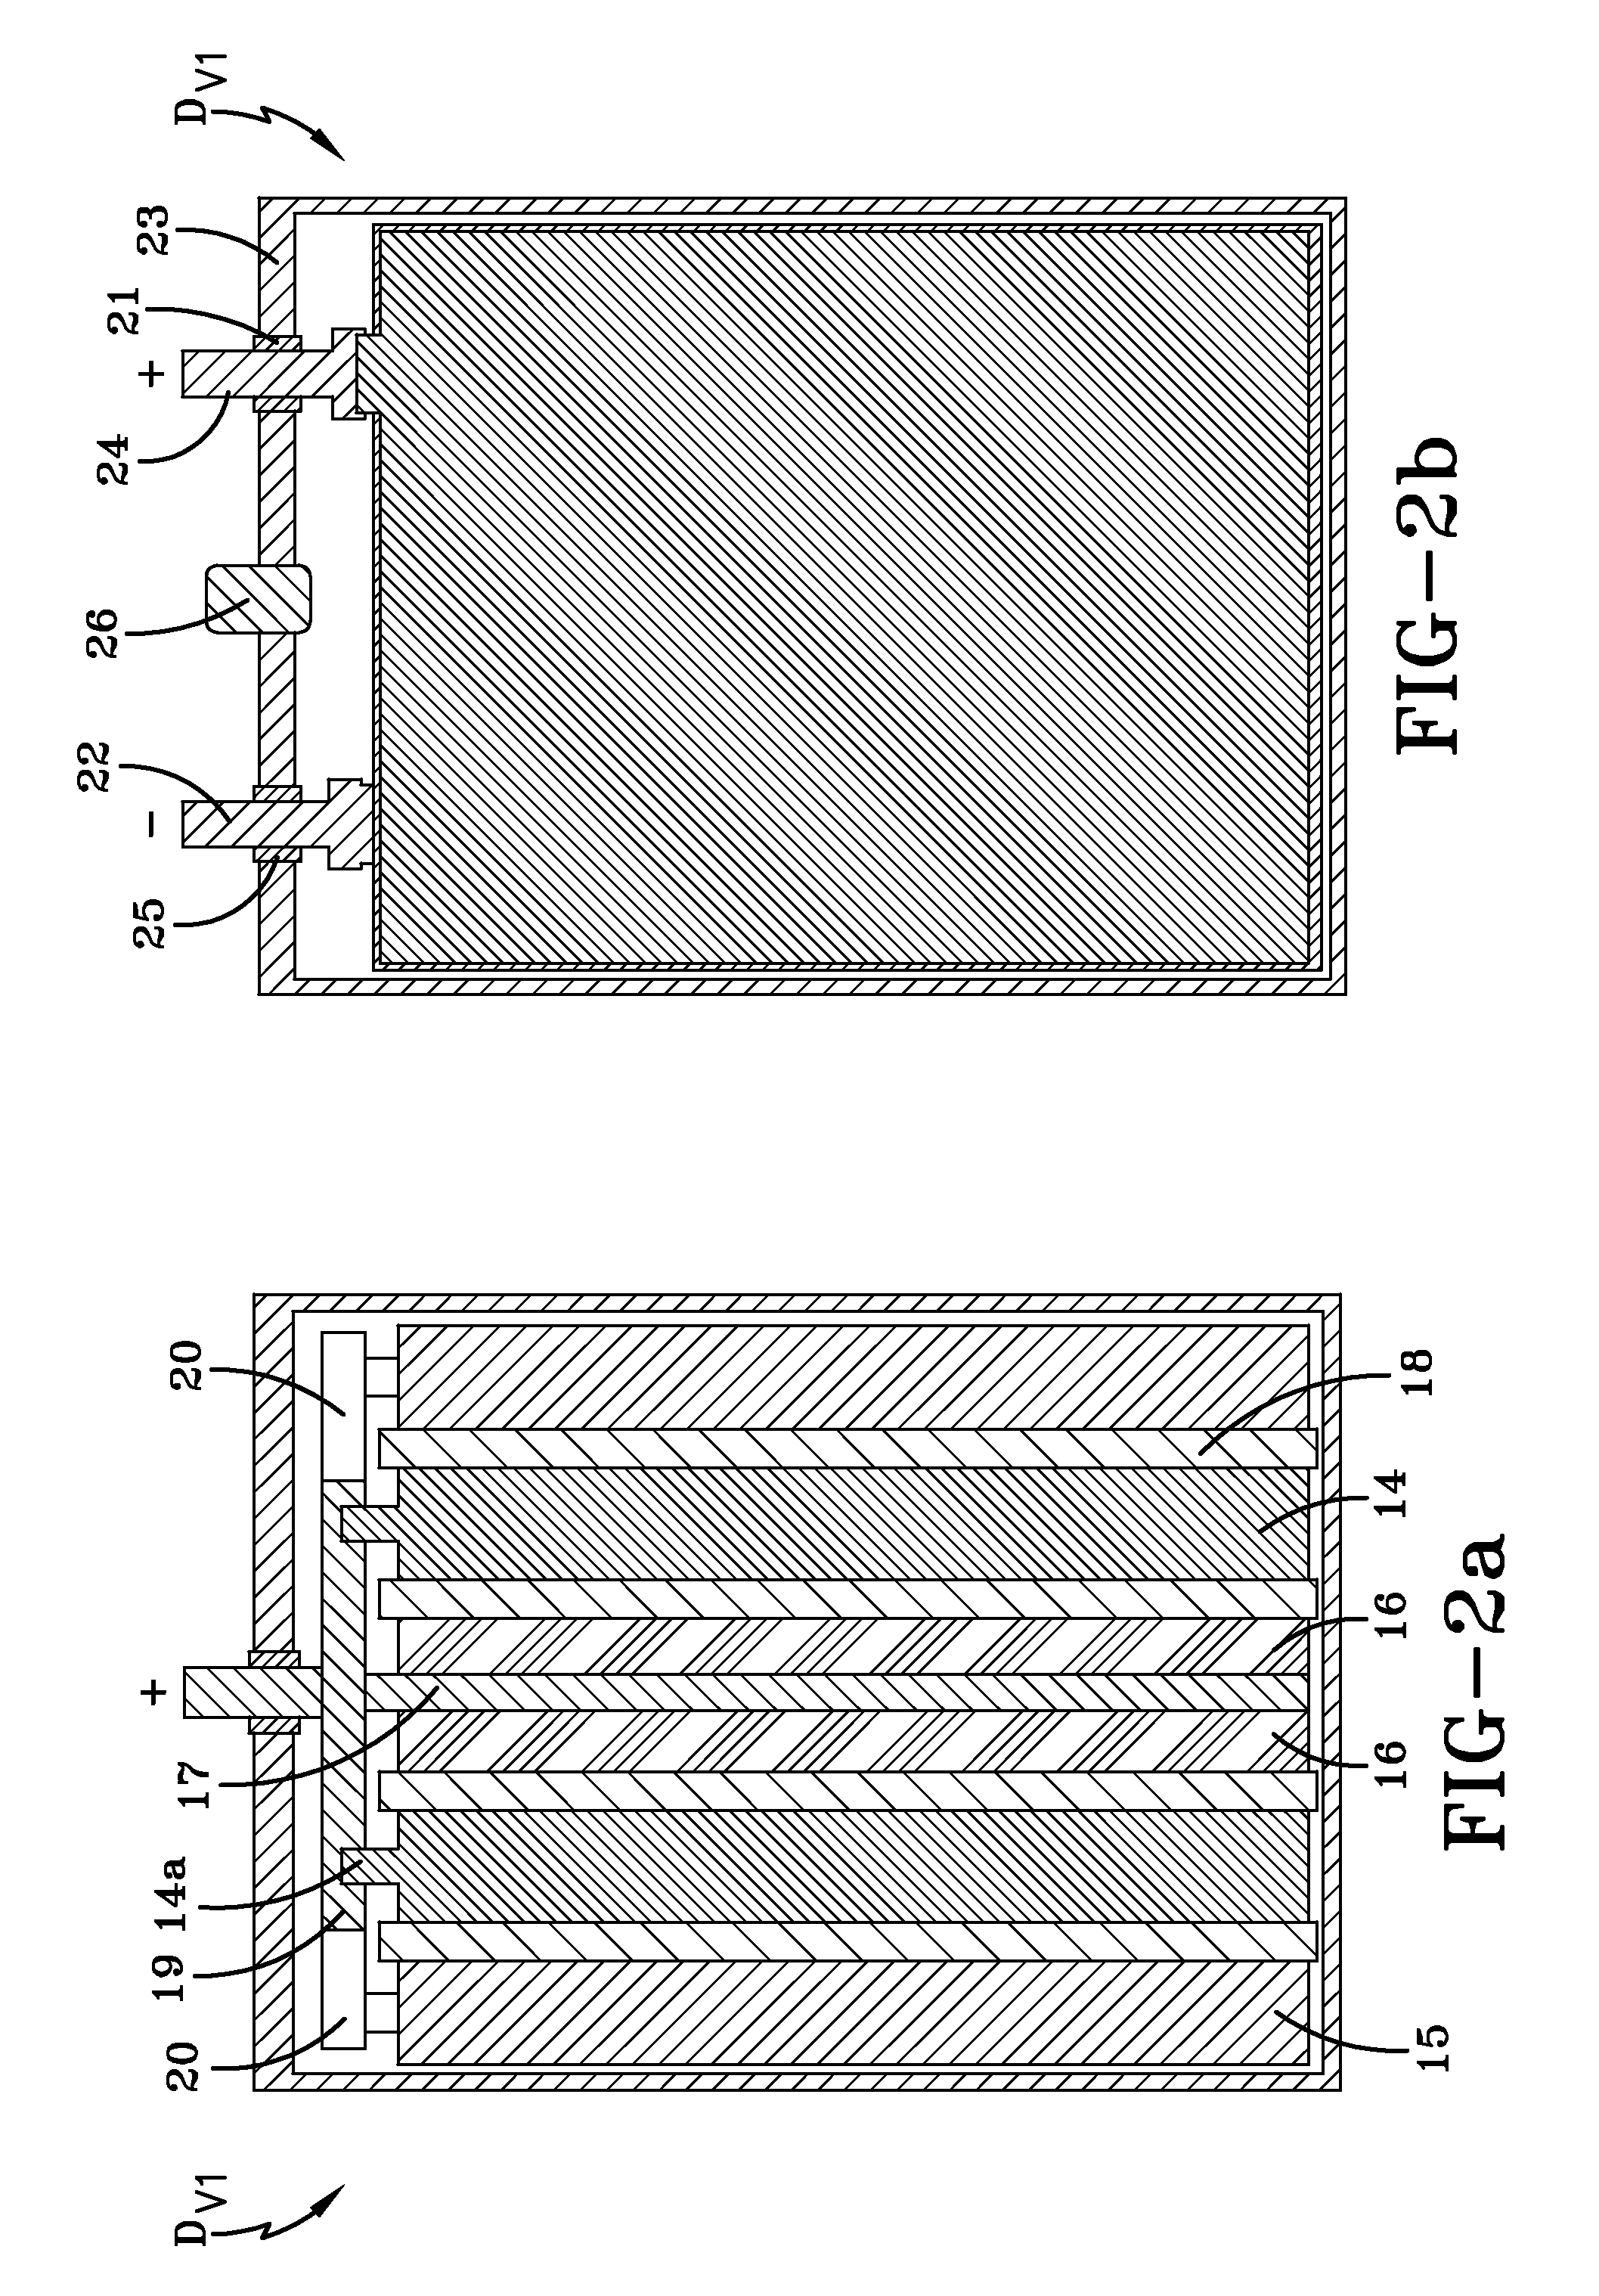 Electrochemical supercapacitor/lead-acid battery hybrid electrical energy storage device